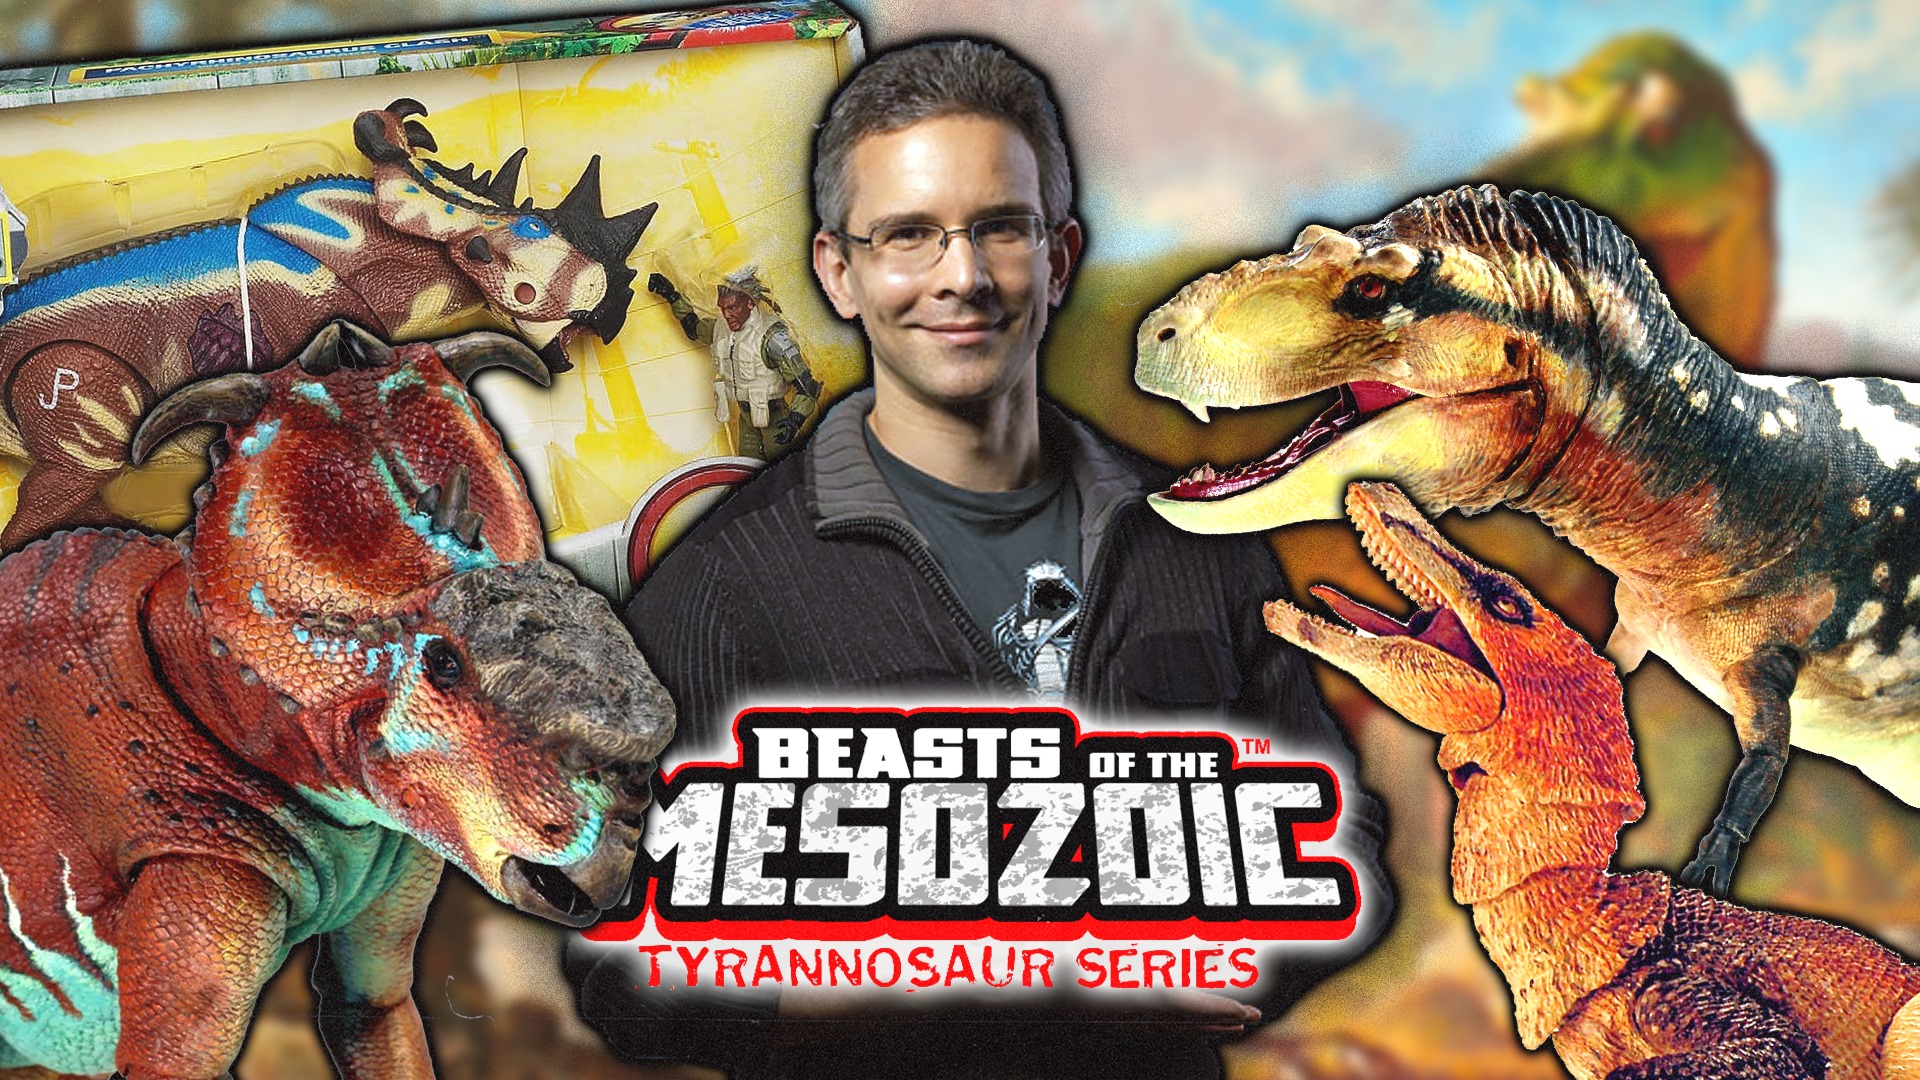 Interview with BEASTS OF THE MESOZOIC Creator David Silva!